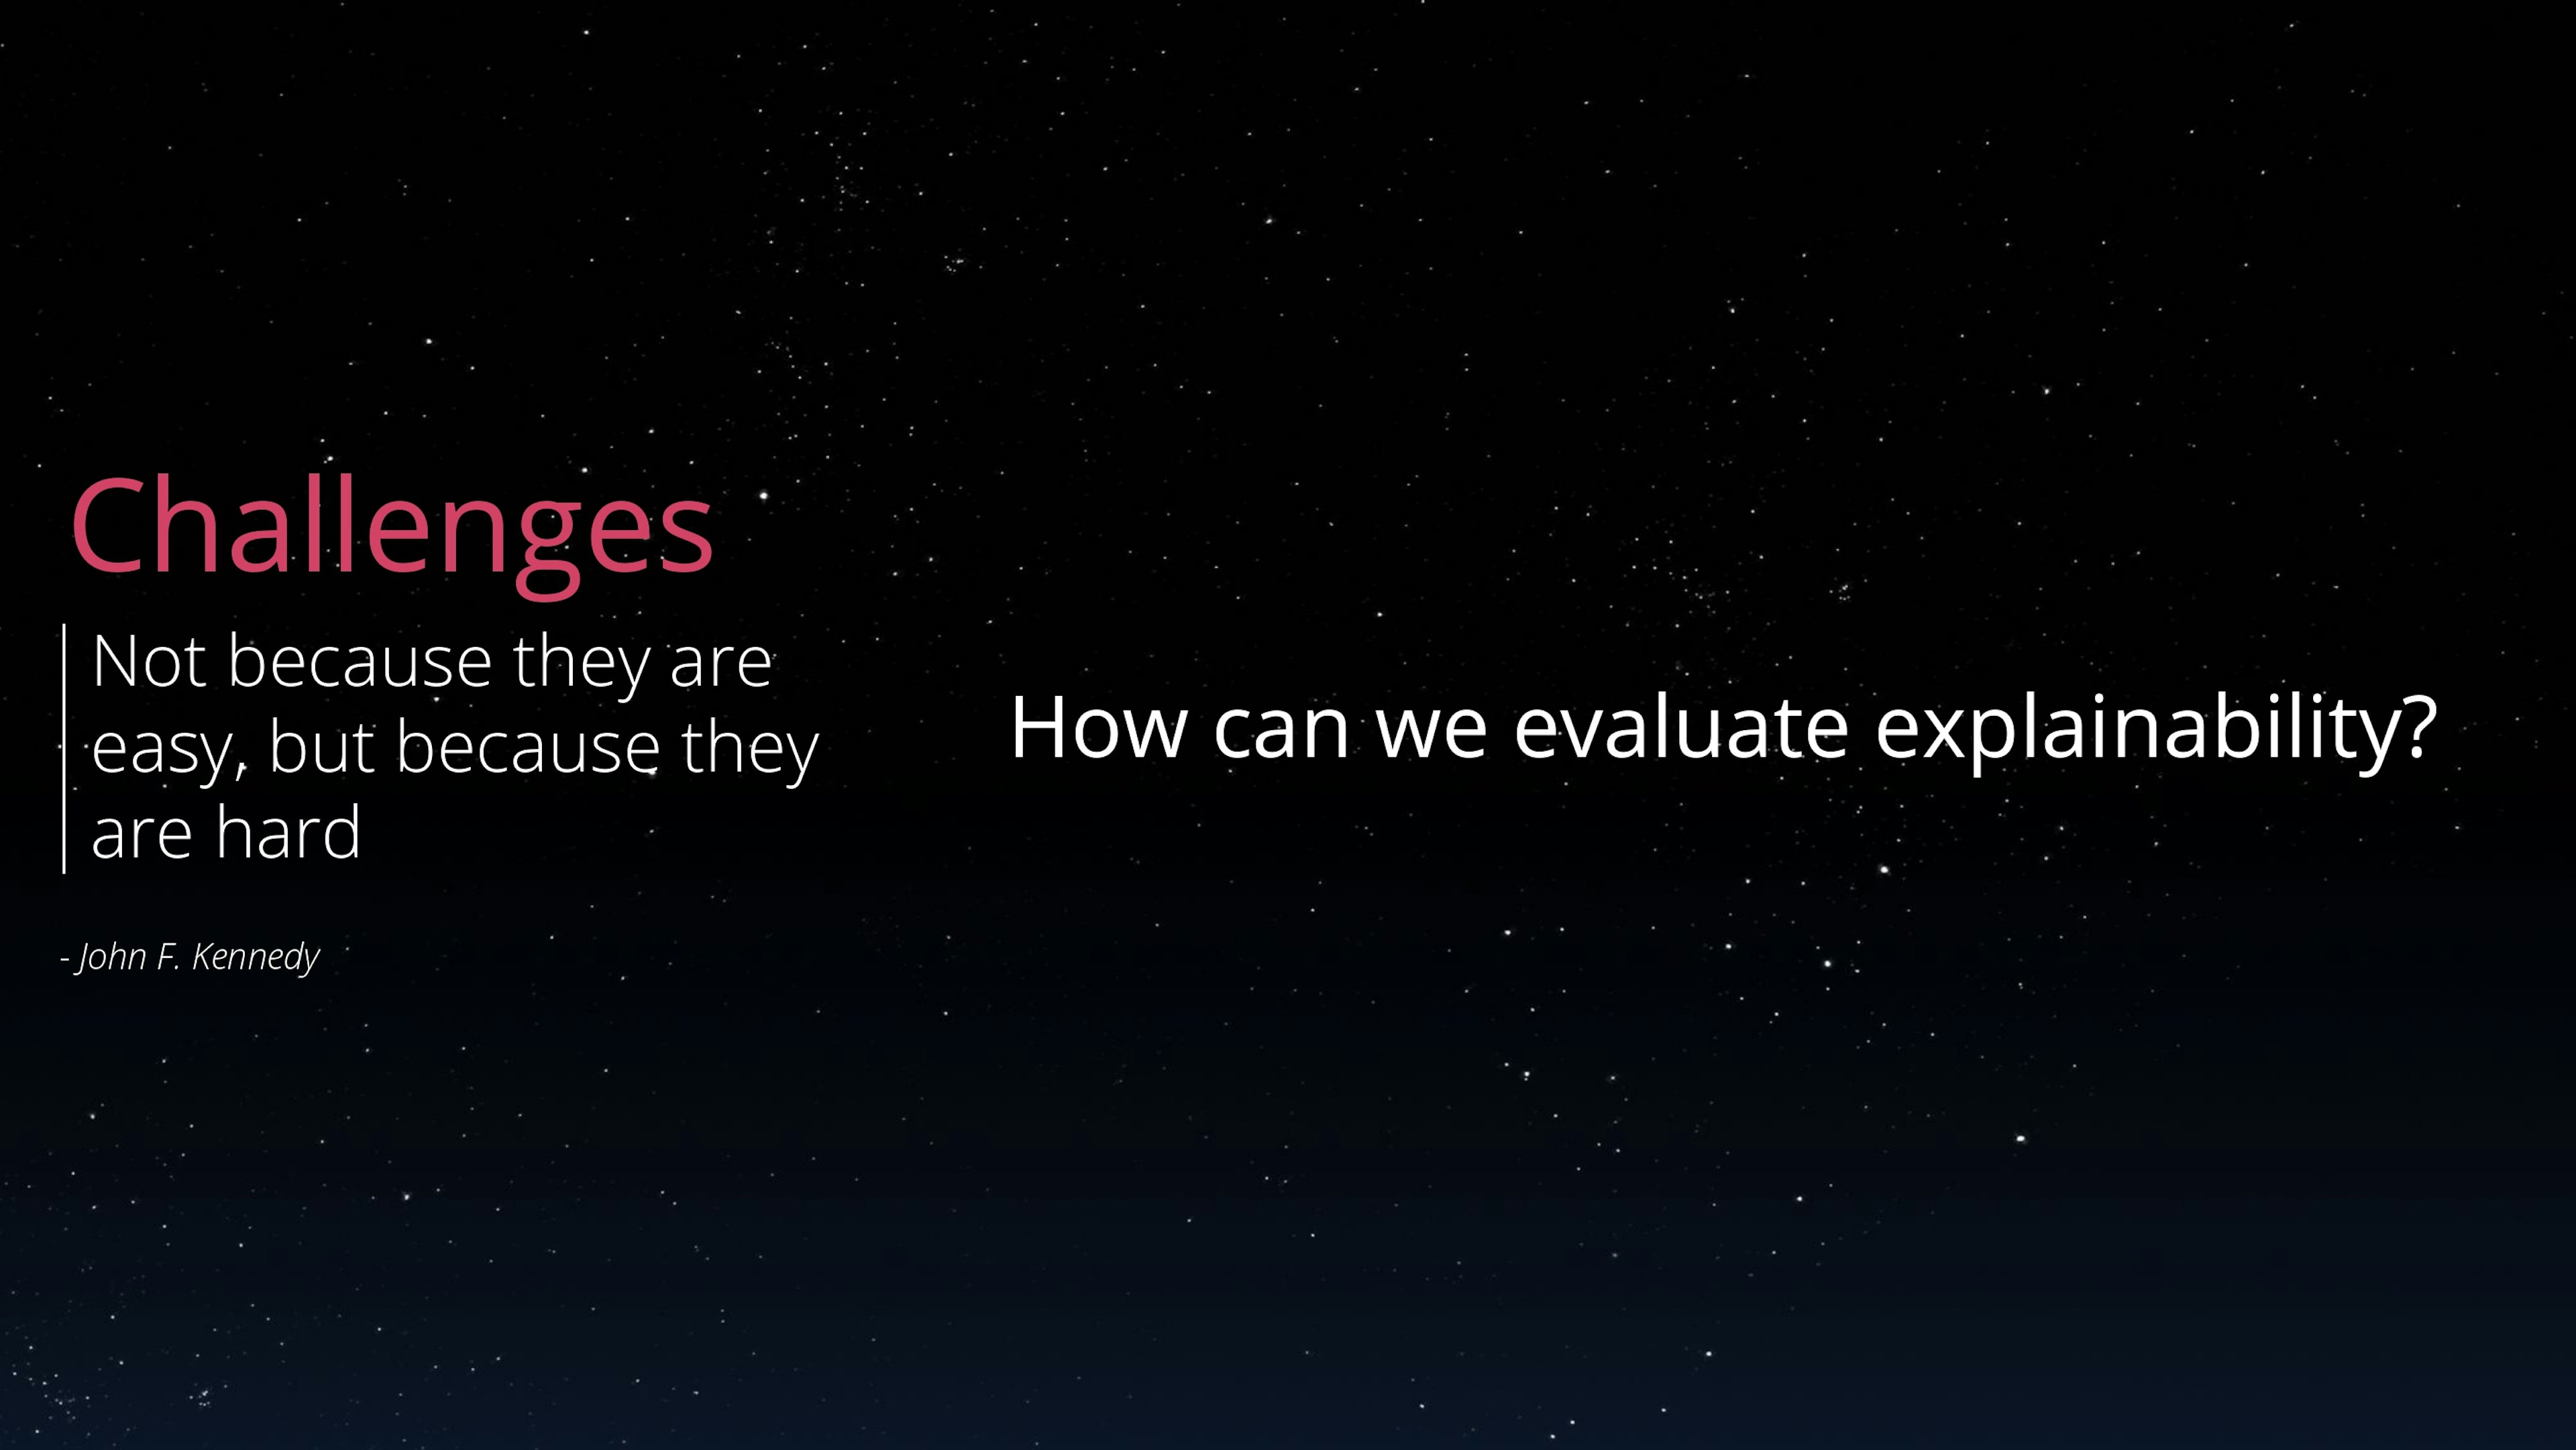 The three stages of Explainable AI - How can we evaluate explainability?